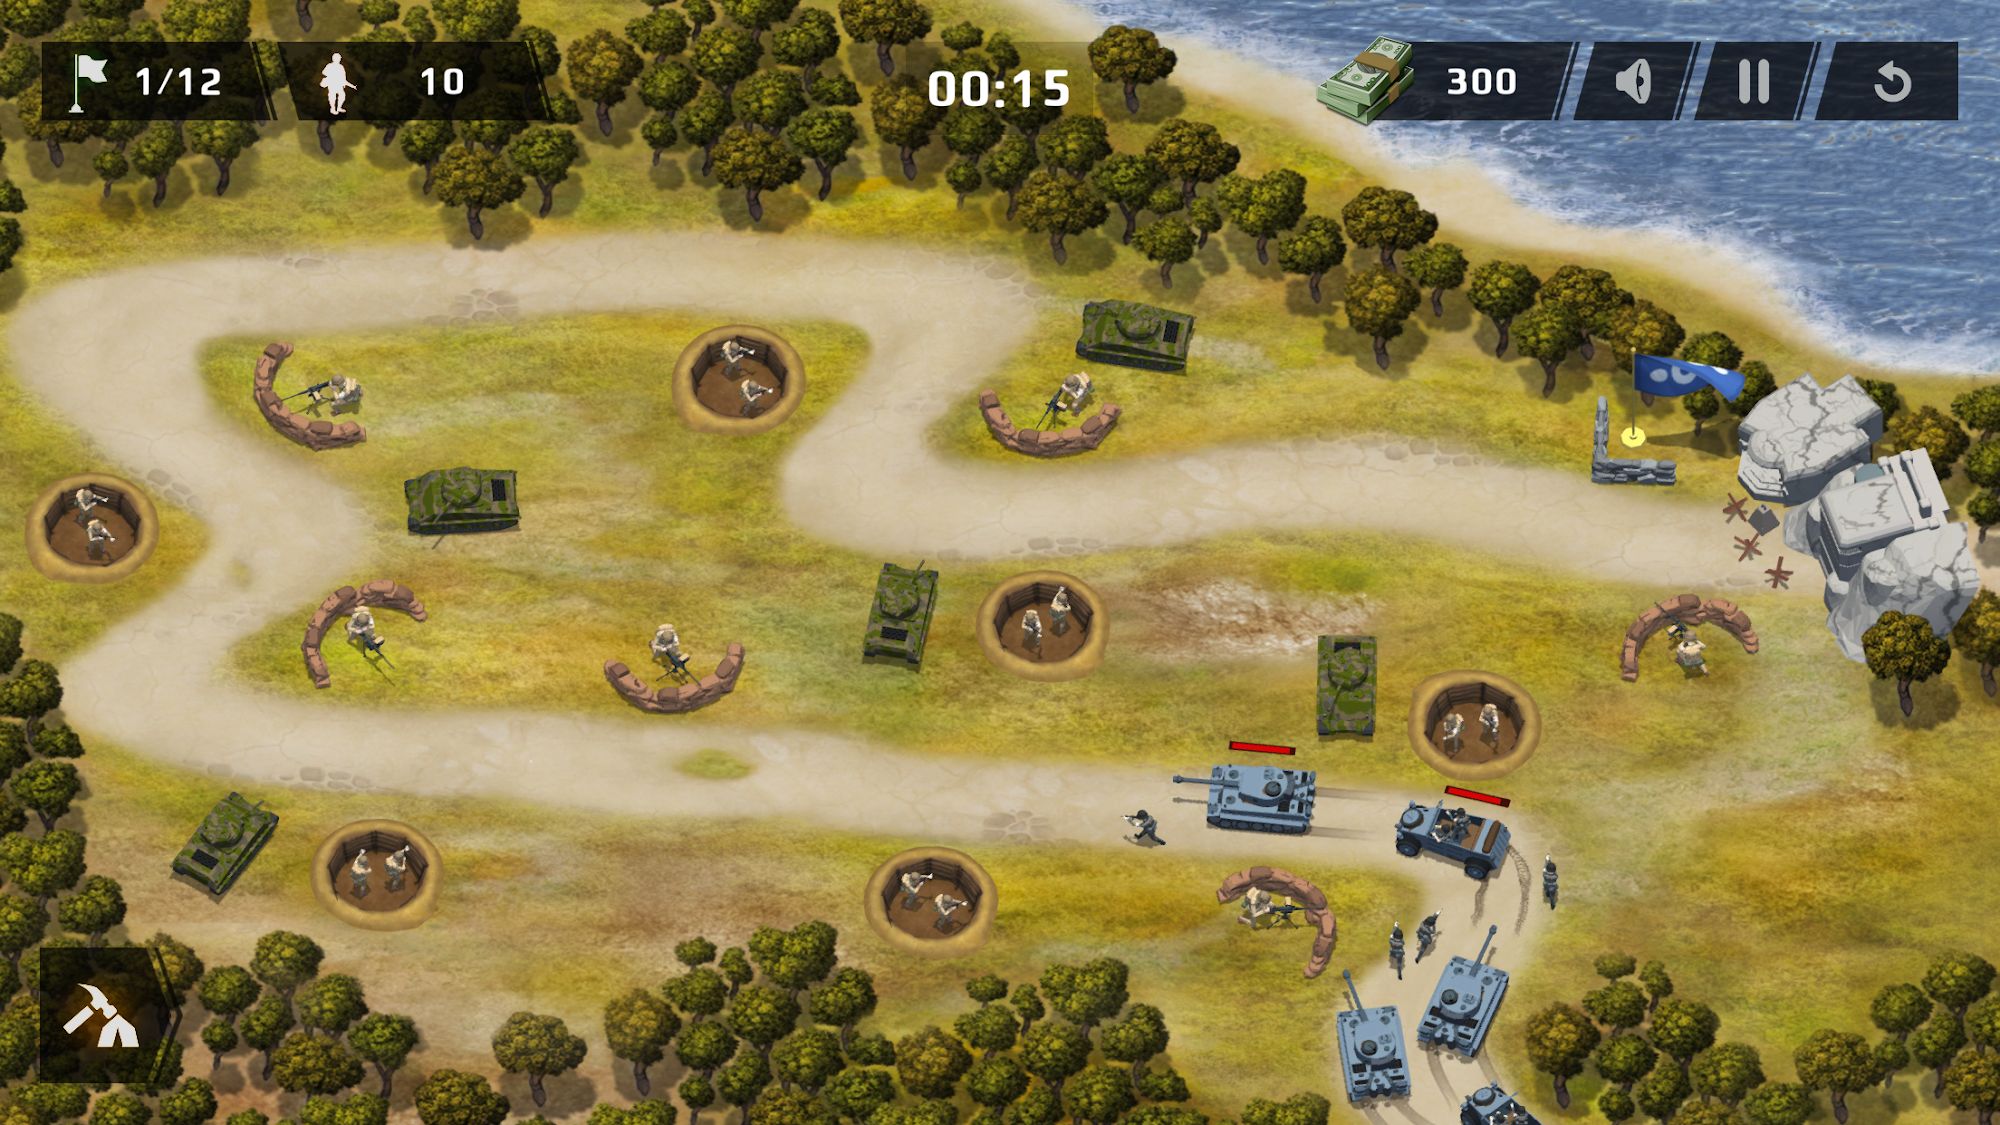 Download WWII Defense: RTS Army TD game Android free game.